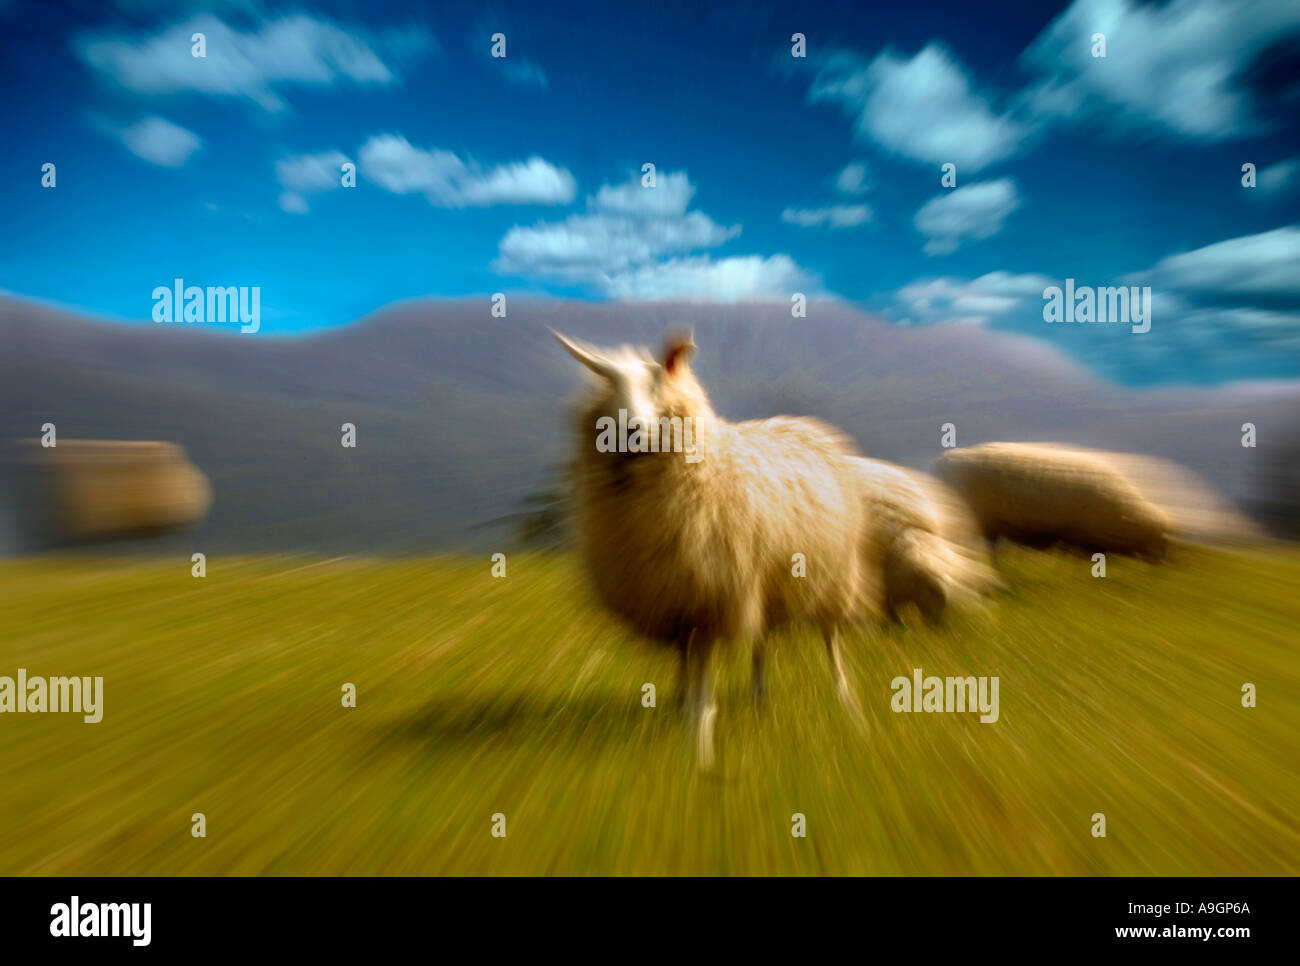 Sheep in a surreal landscape Stock Photo